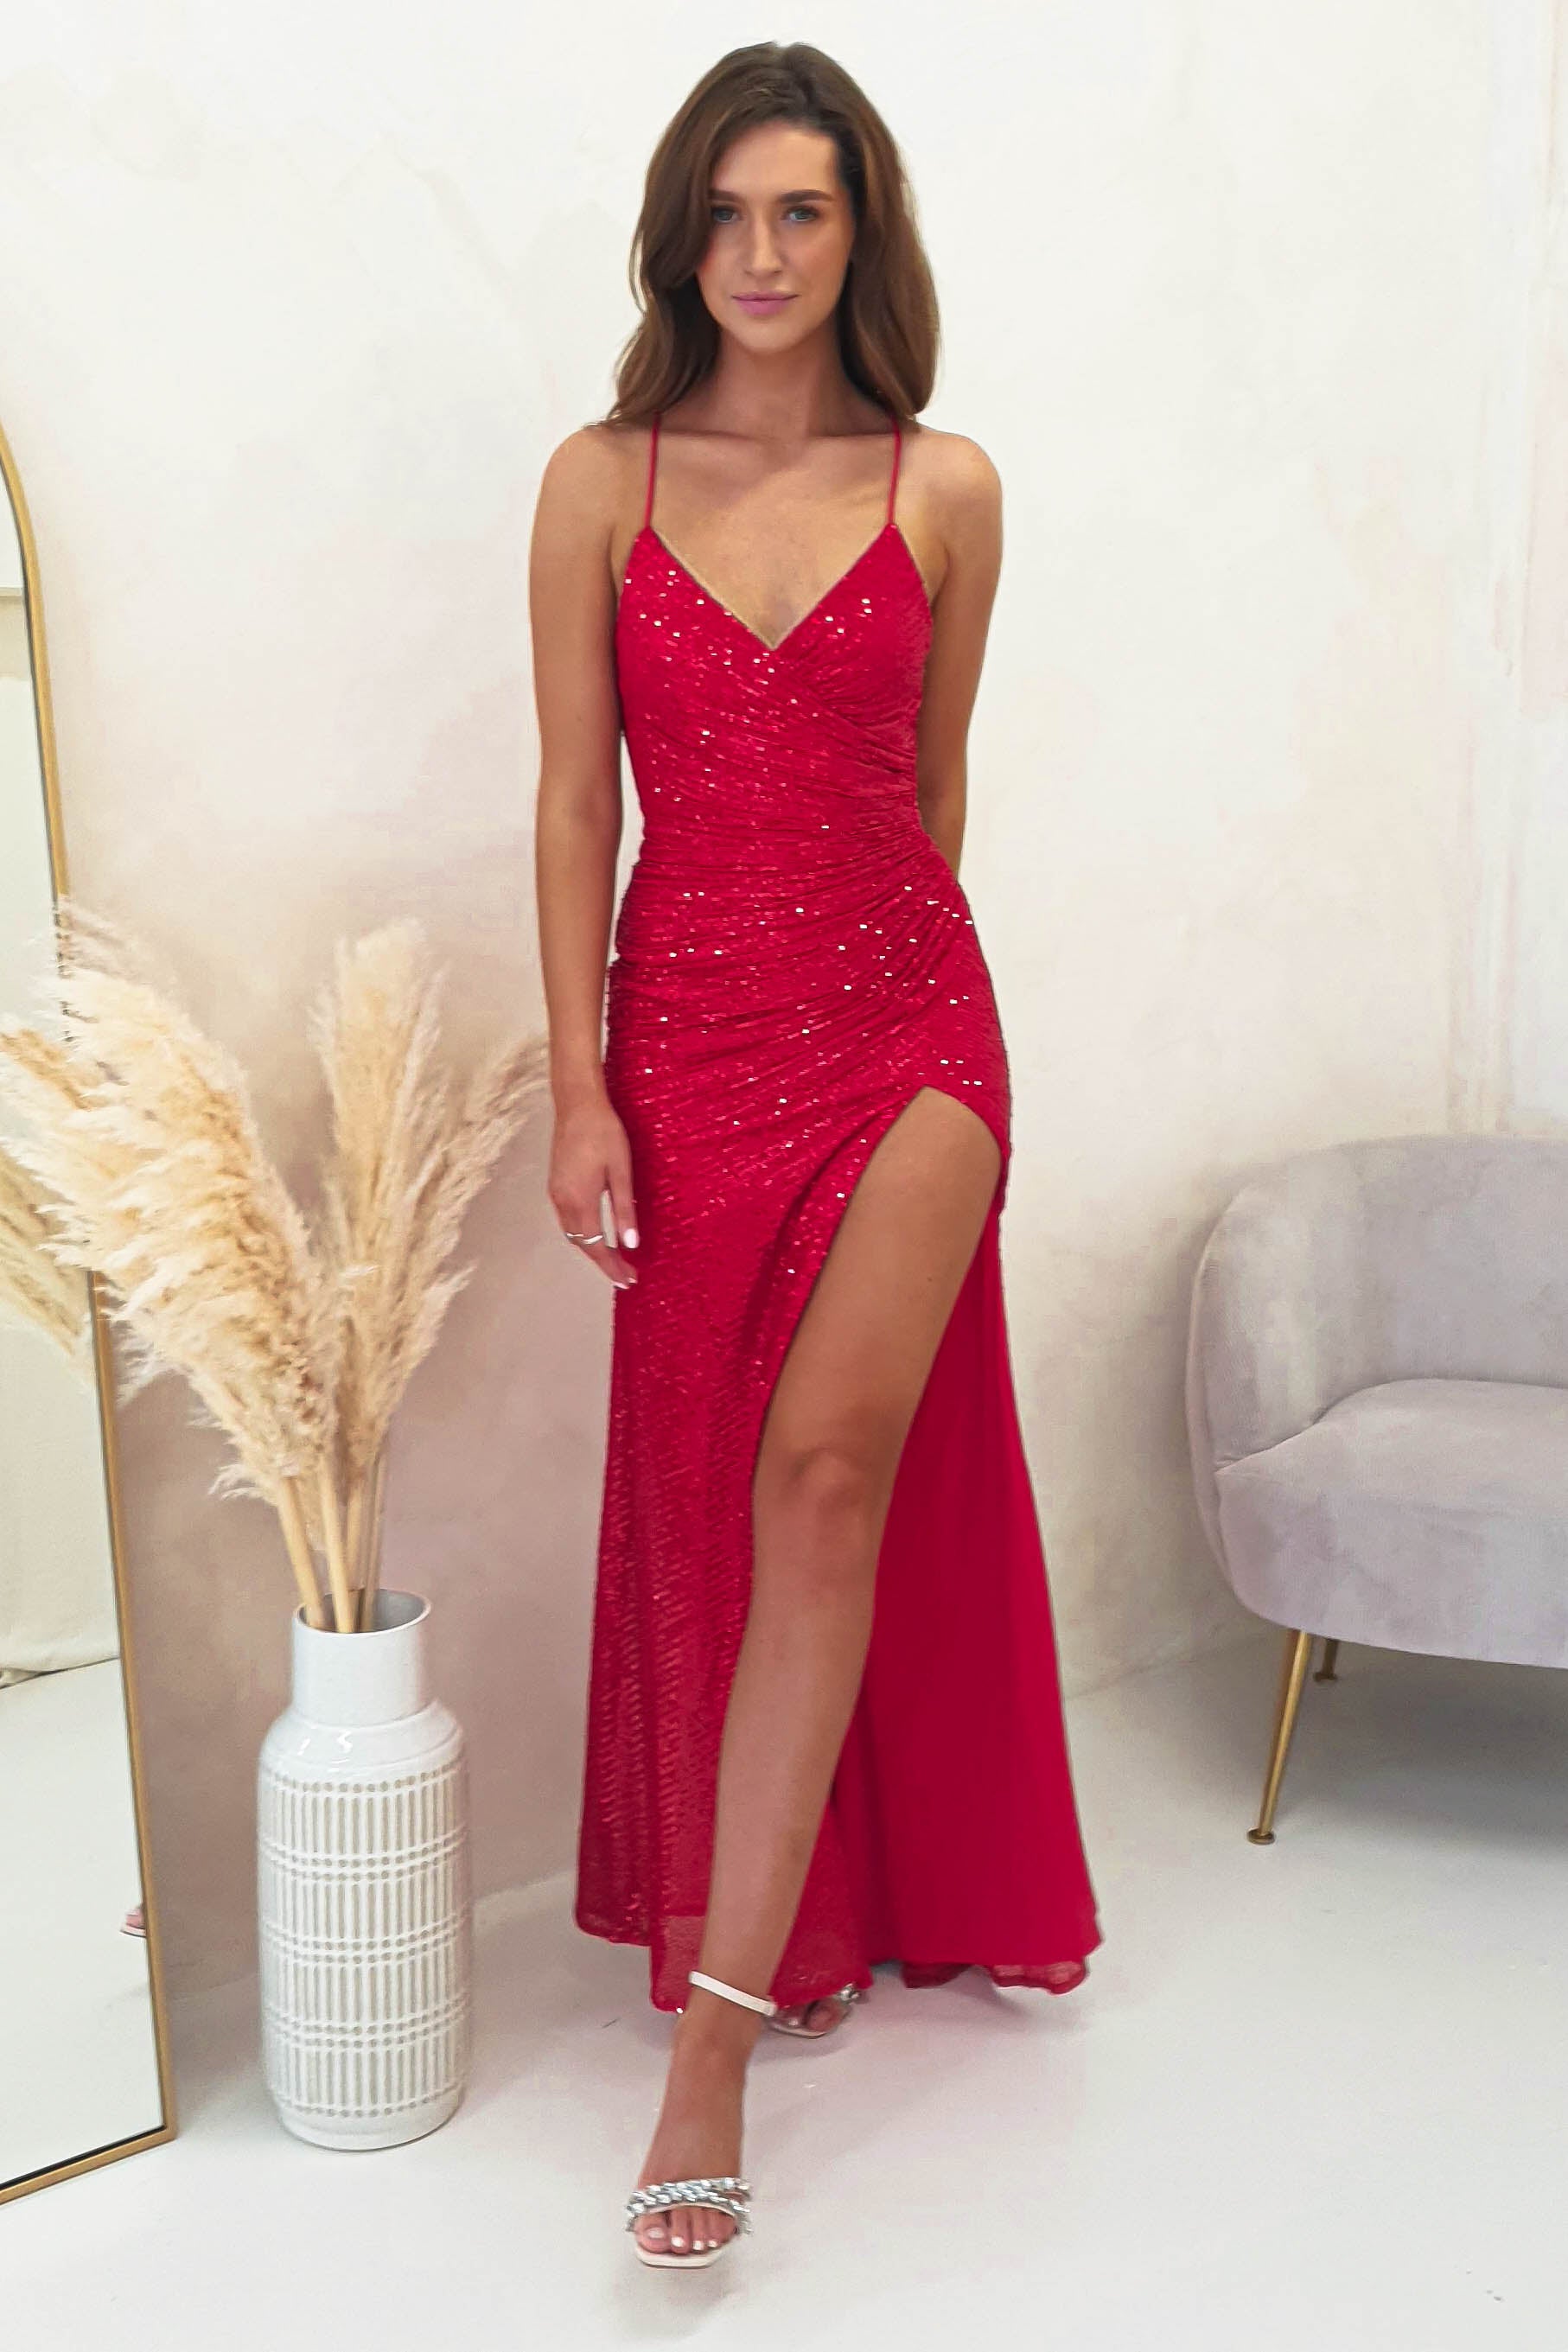 kalila-sequin-gown-red-kalila-gown-gold-red-sequin-oh-hello-clothing-50460786295125.jpg